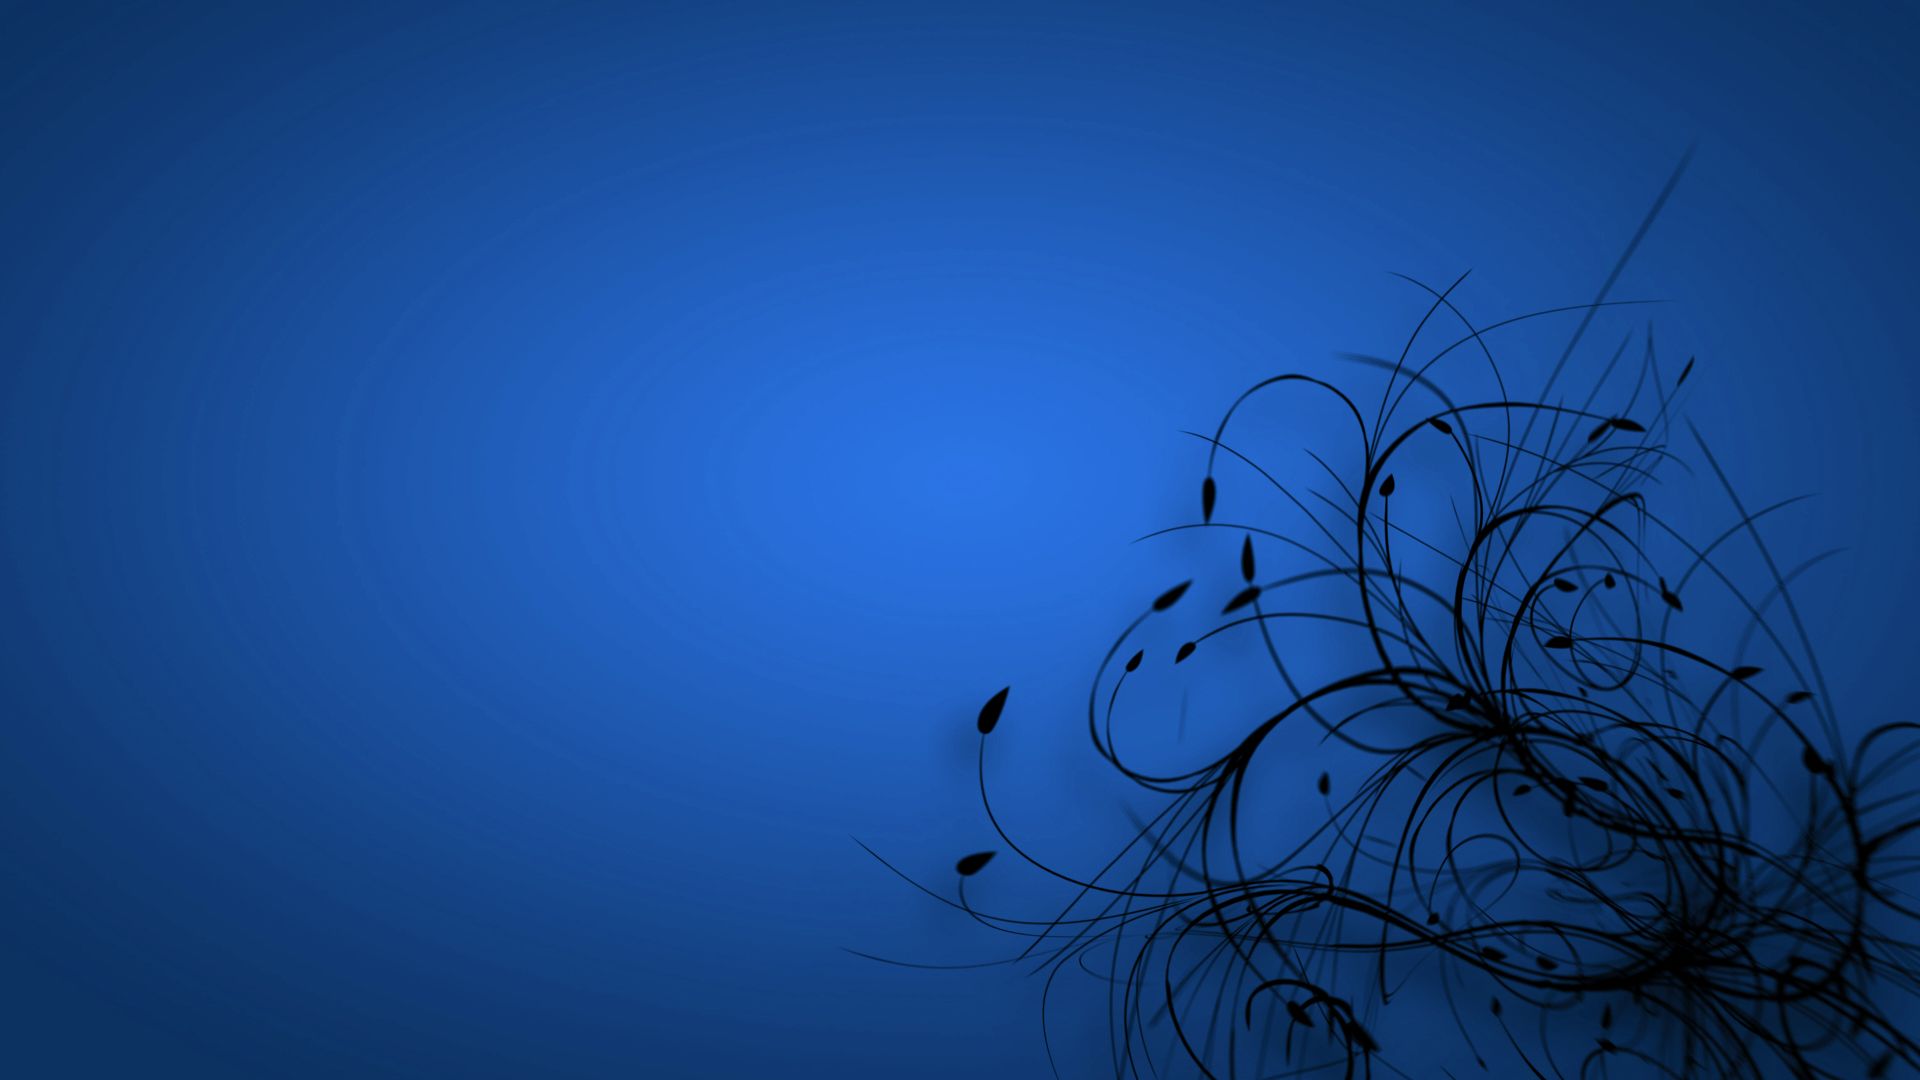 Blue PC Wallpapers on WallpaperDog